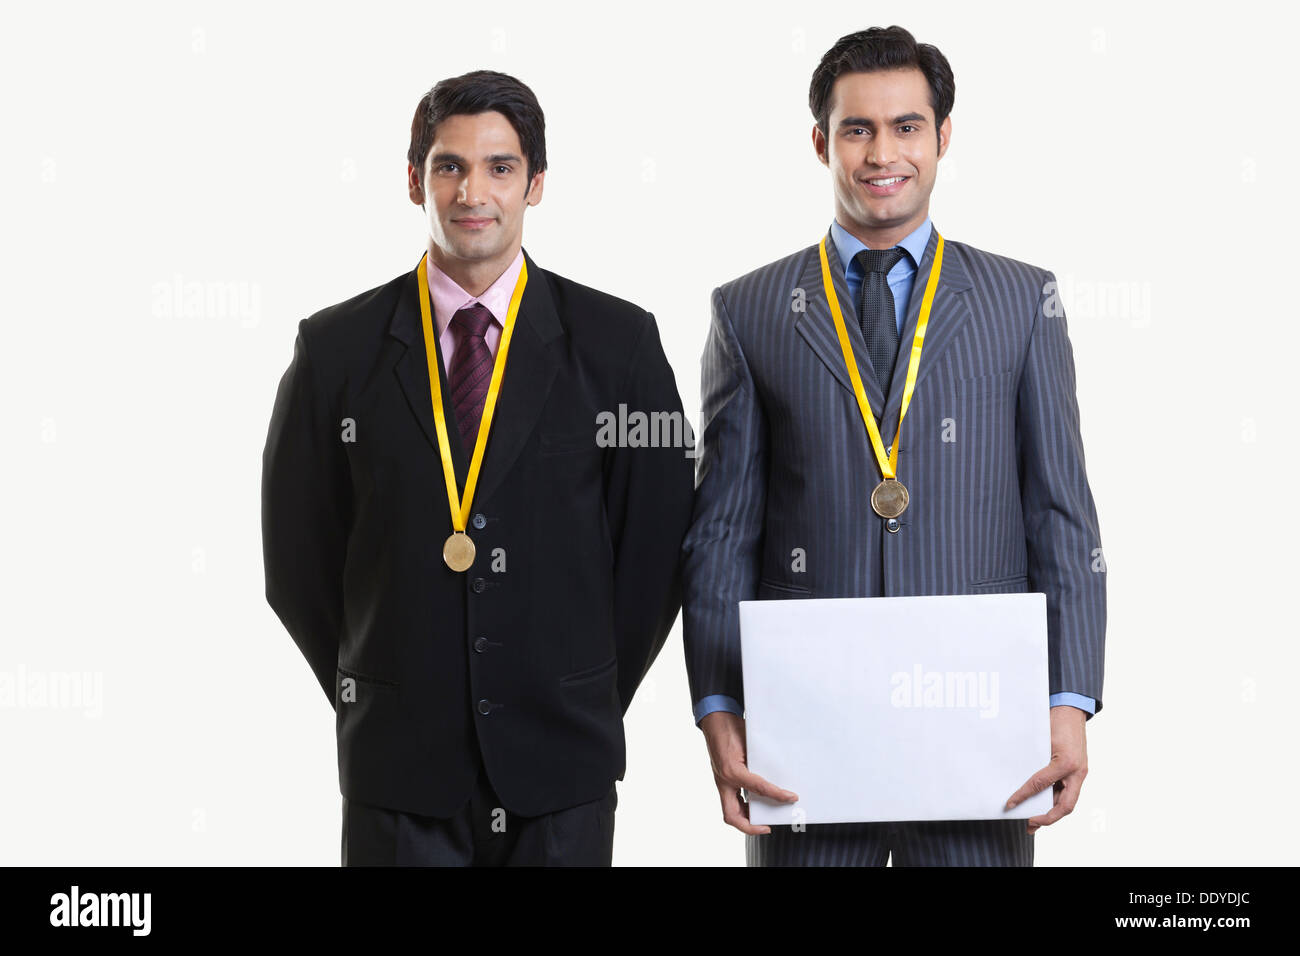 Businessmen with medals Stock Photo